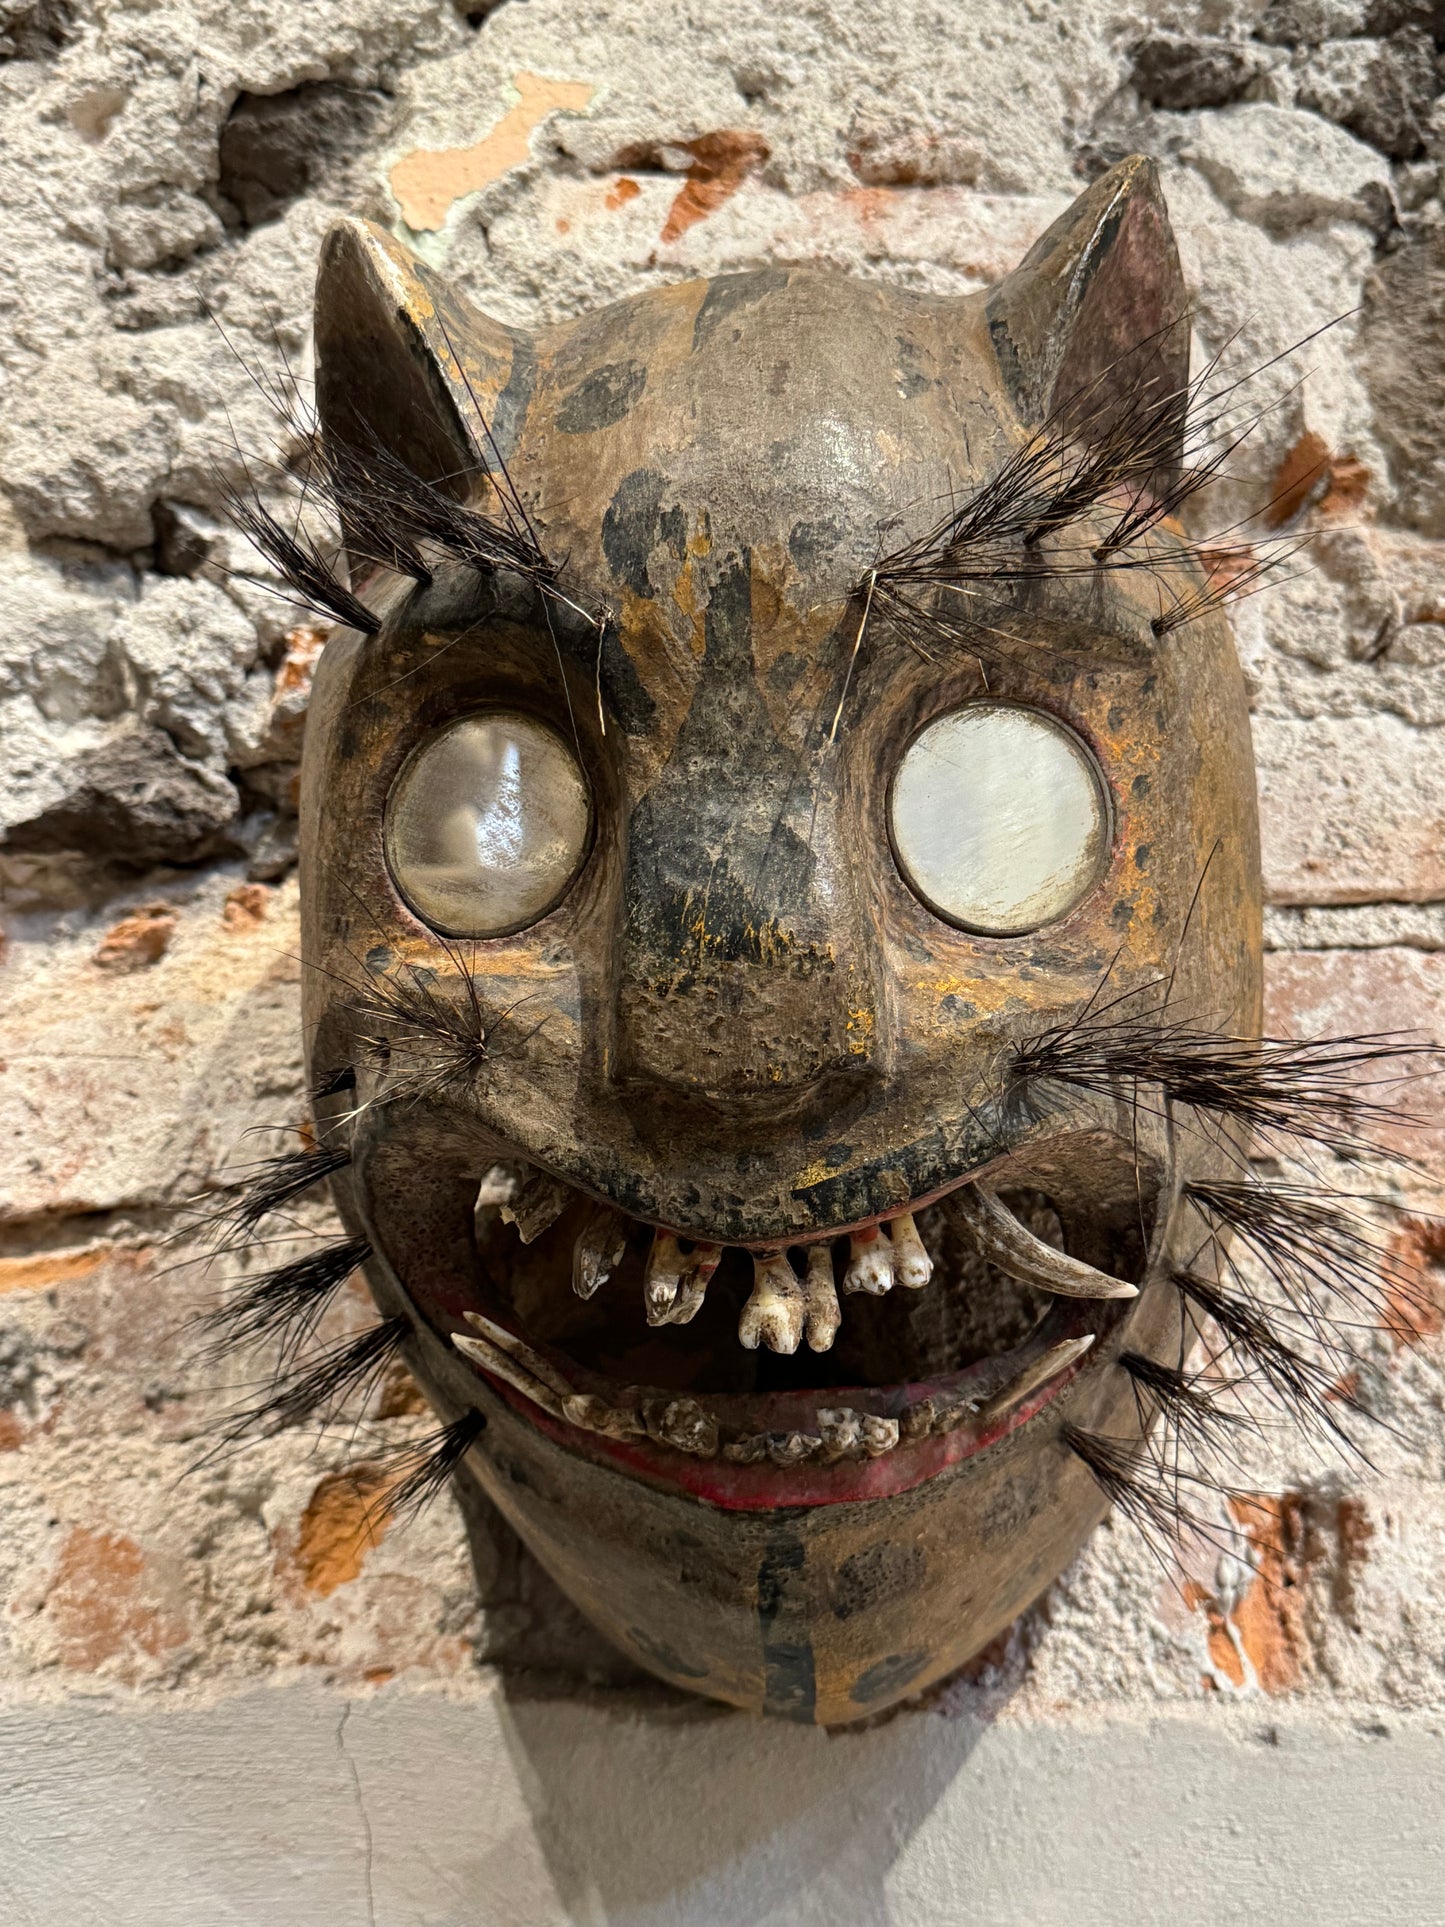 Tiger Mask From The Chilapa region of Guerrero, Circa 1980’s